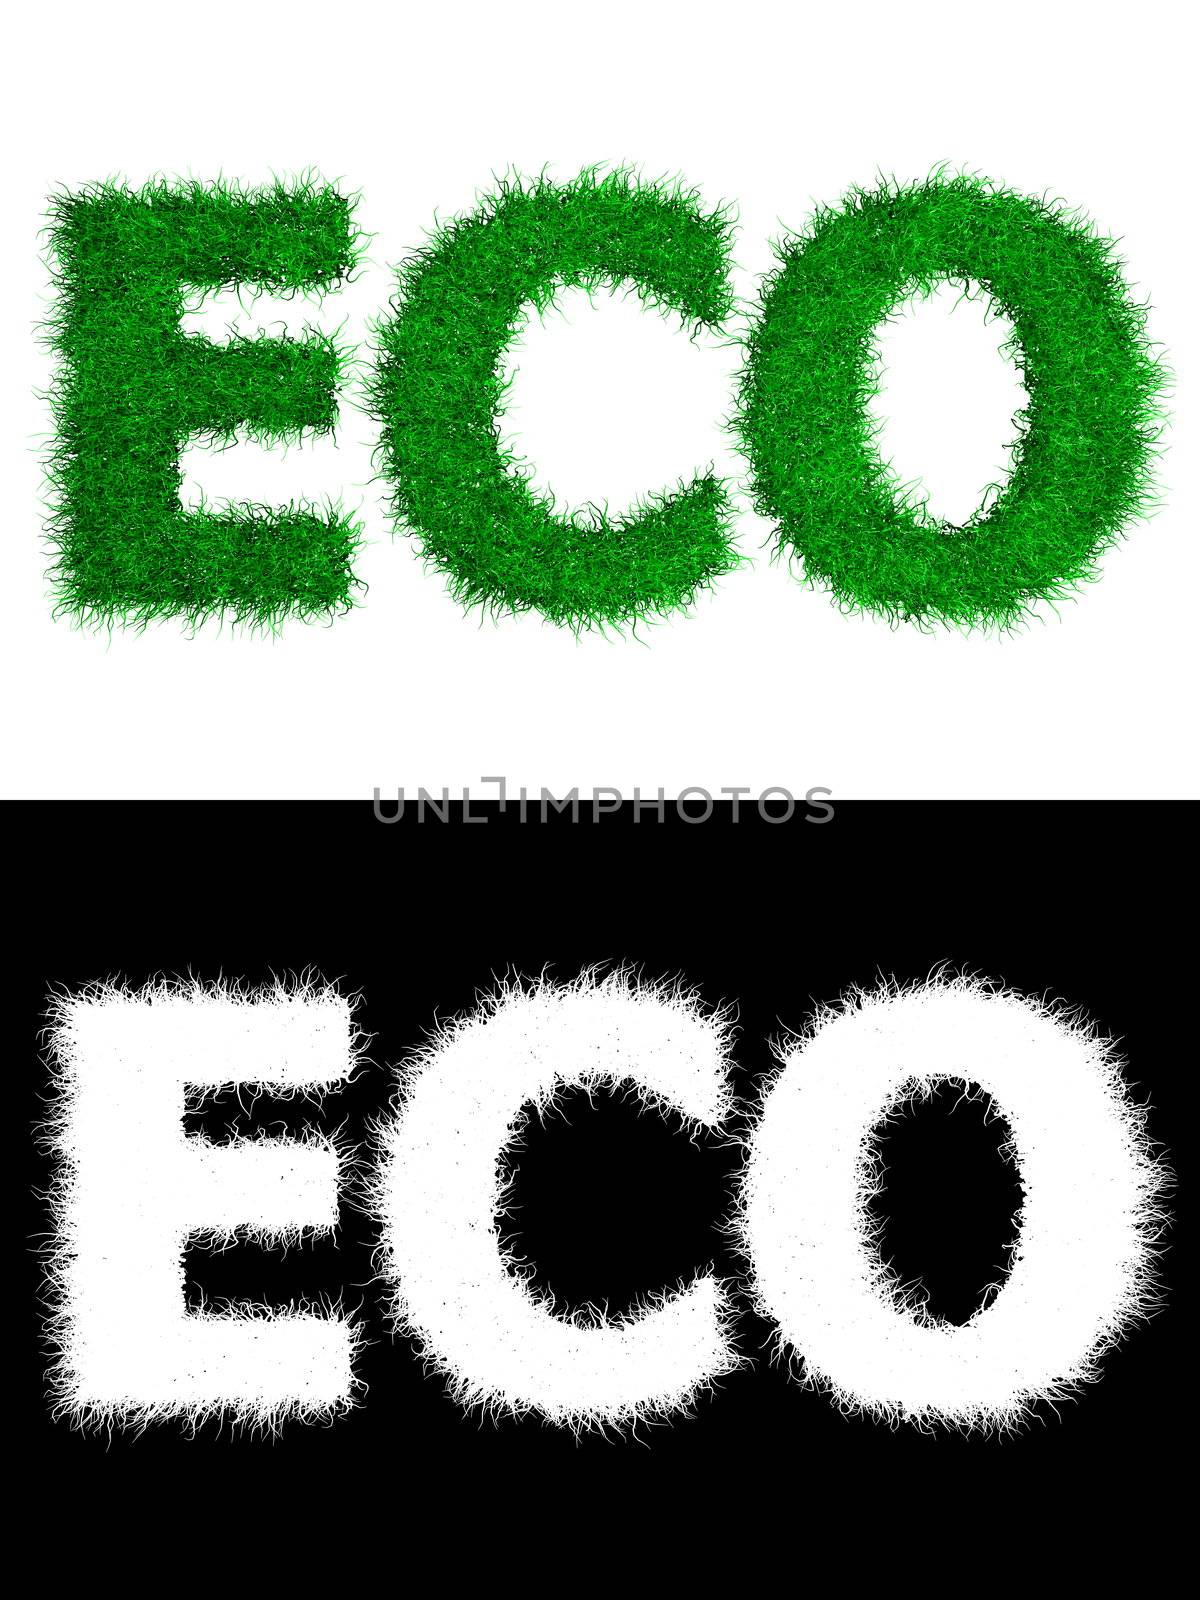 Eco made of Grass - White Background by PixBox